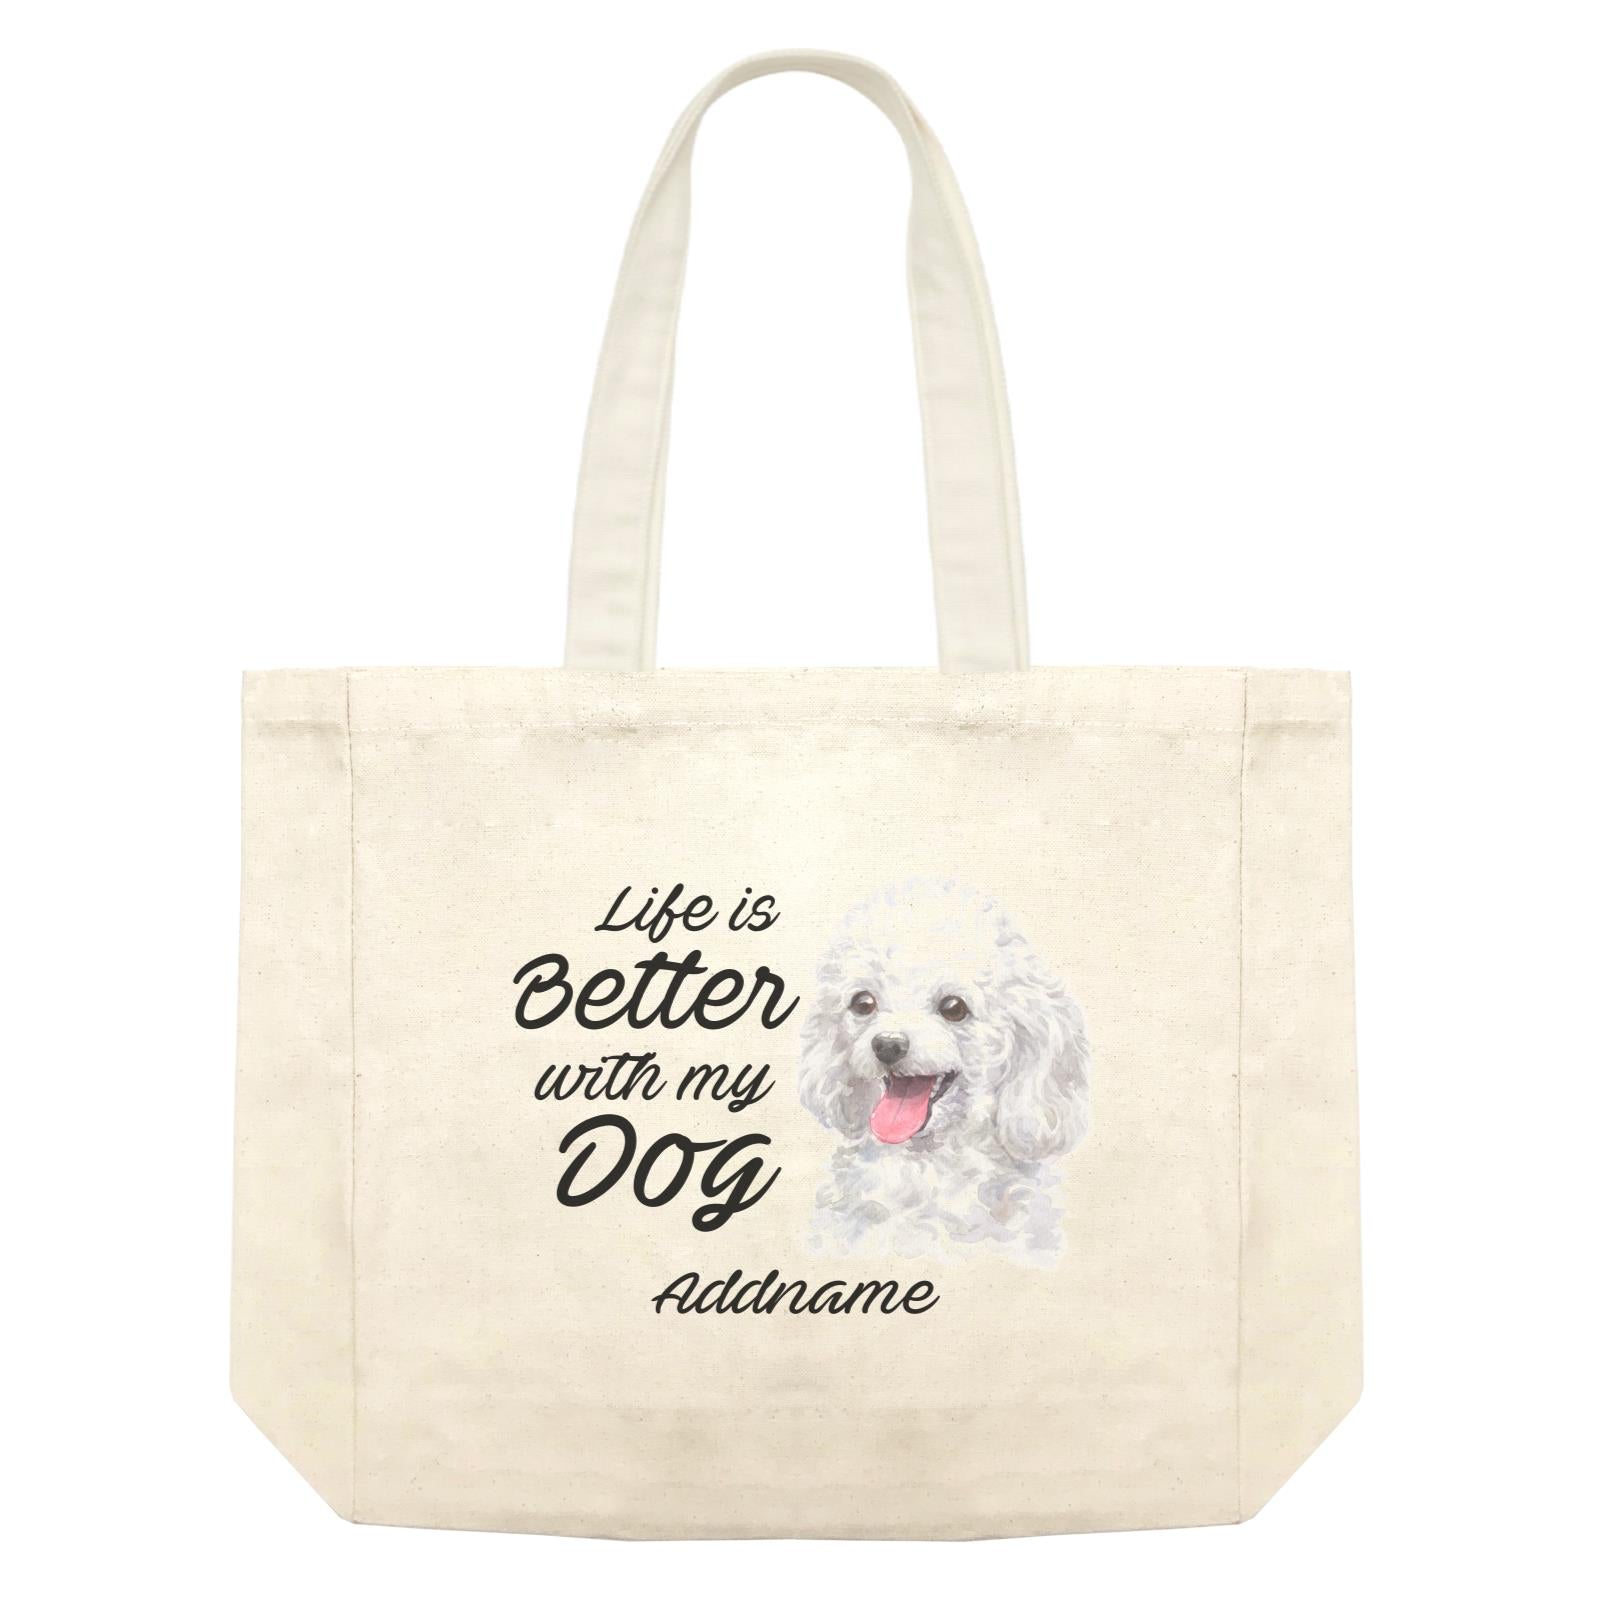 Watercolor Life is Better With My Dog Poodle White Addname Shopping Bag